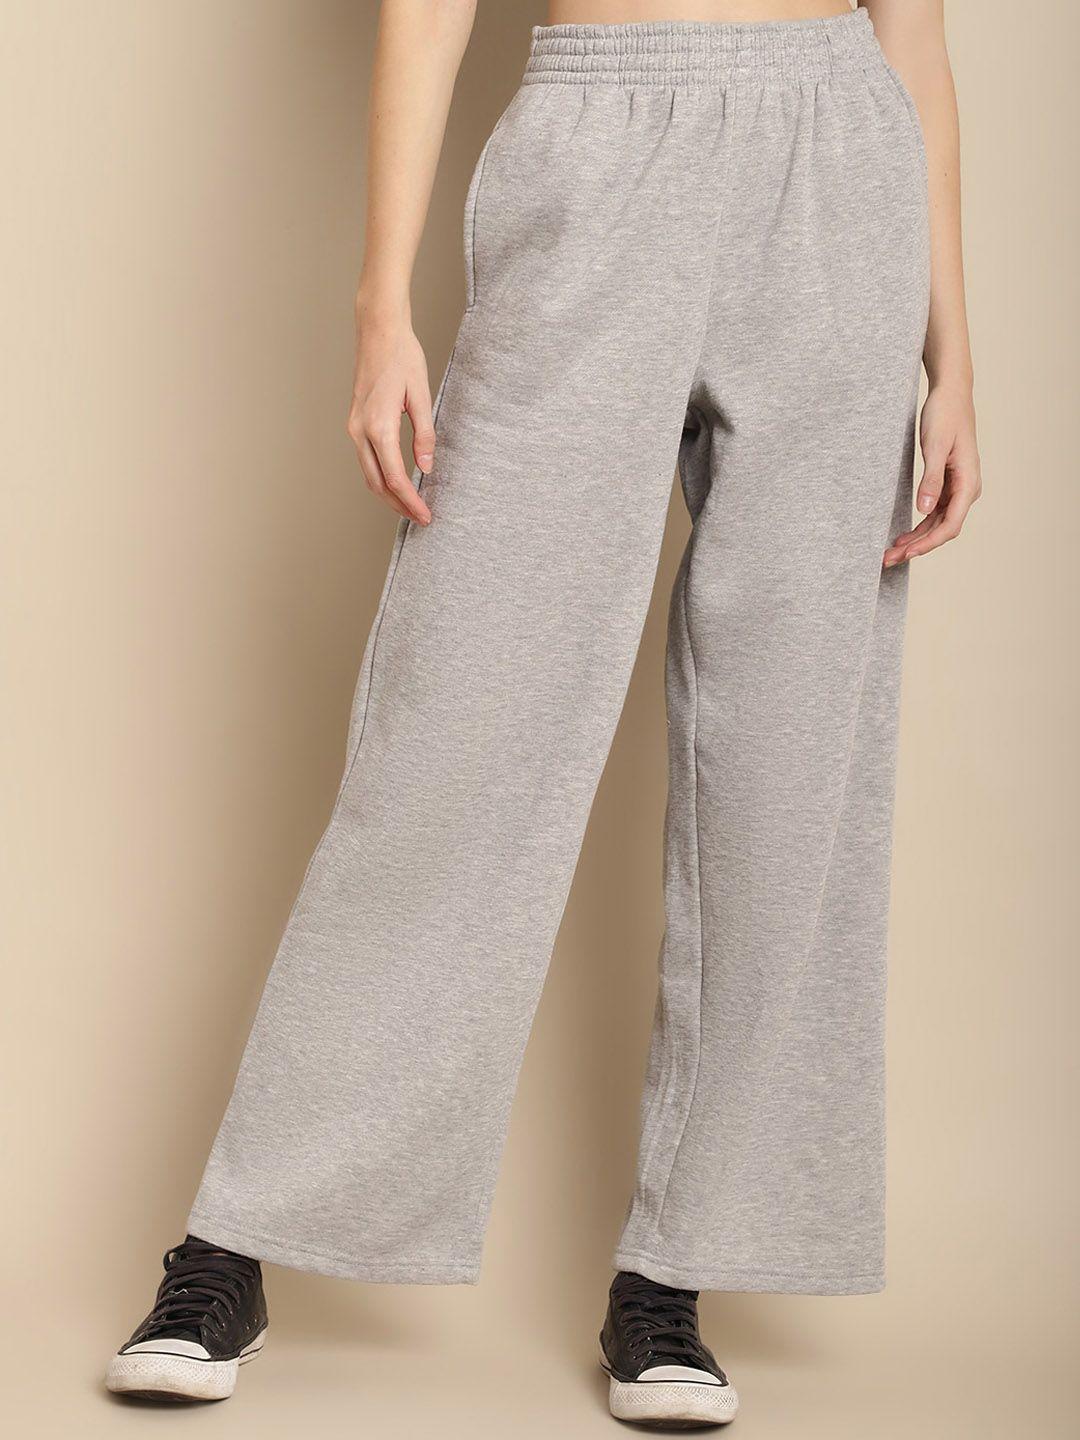 nobarr women flat-front mid-rise parallel trousers